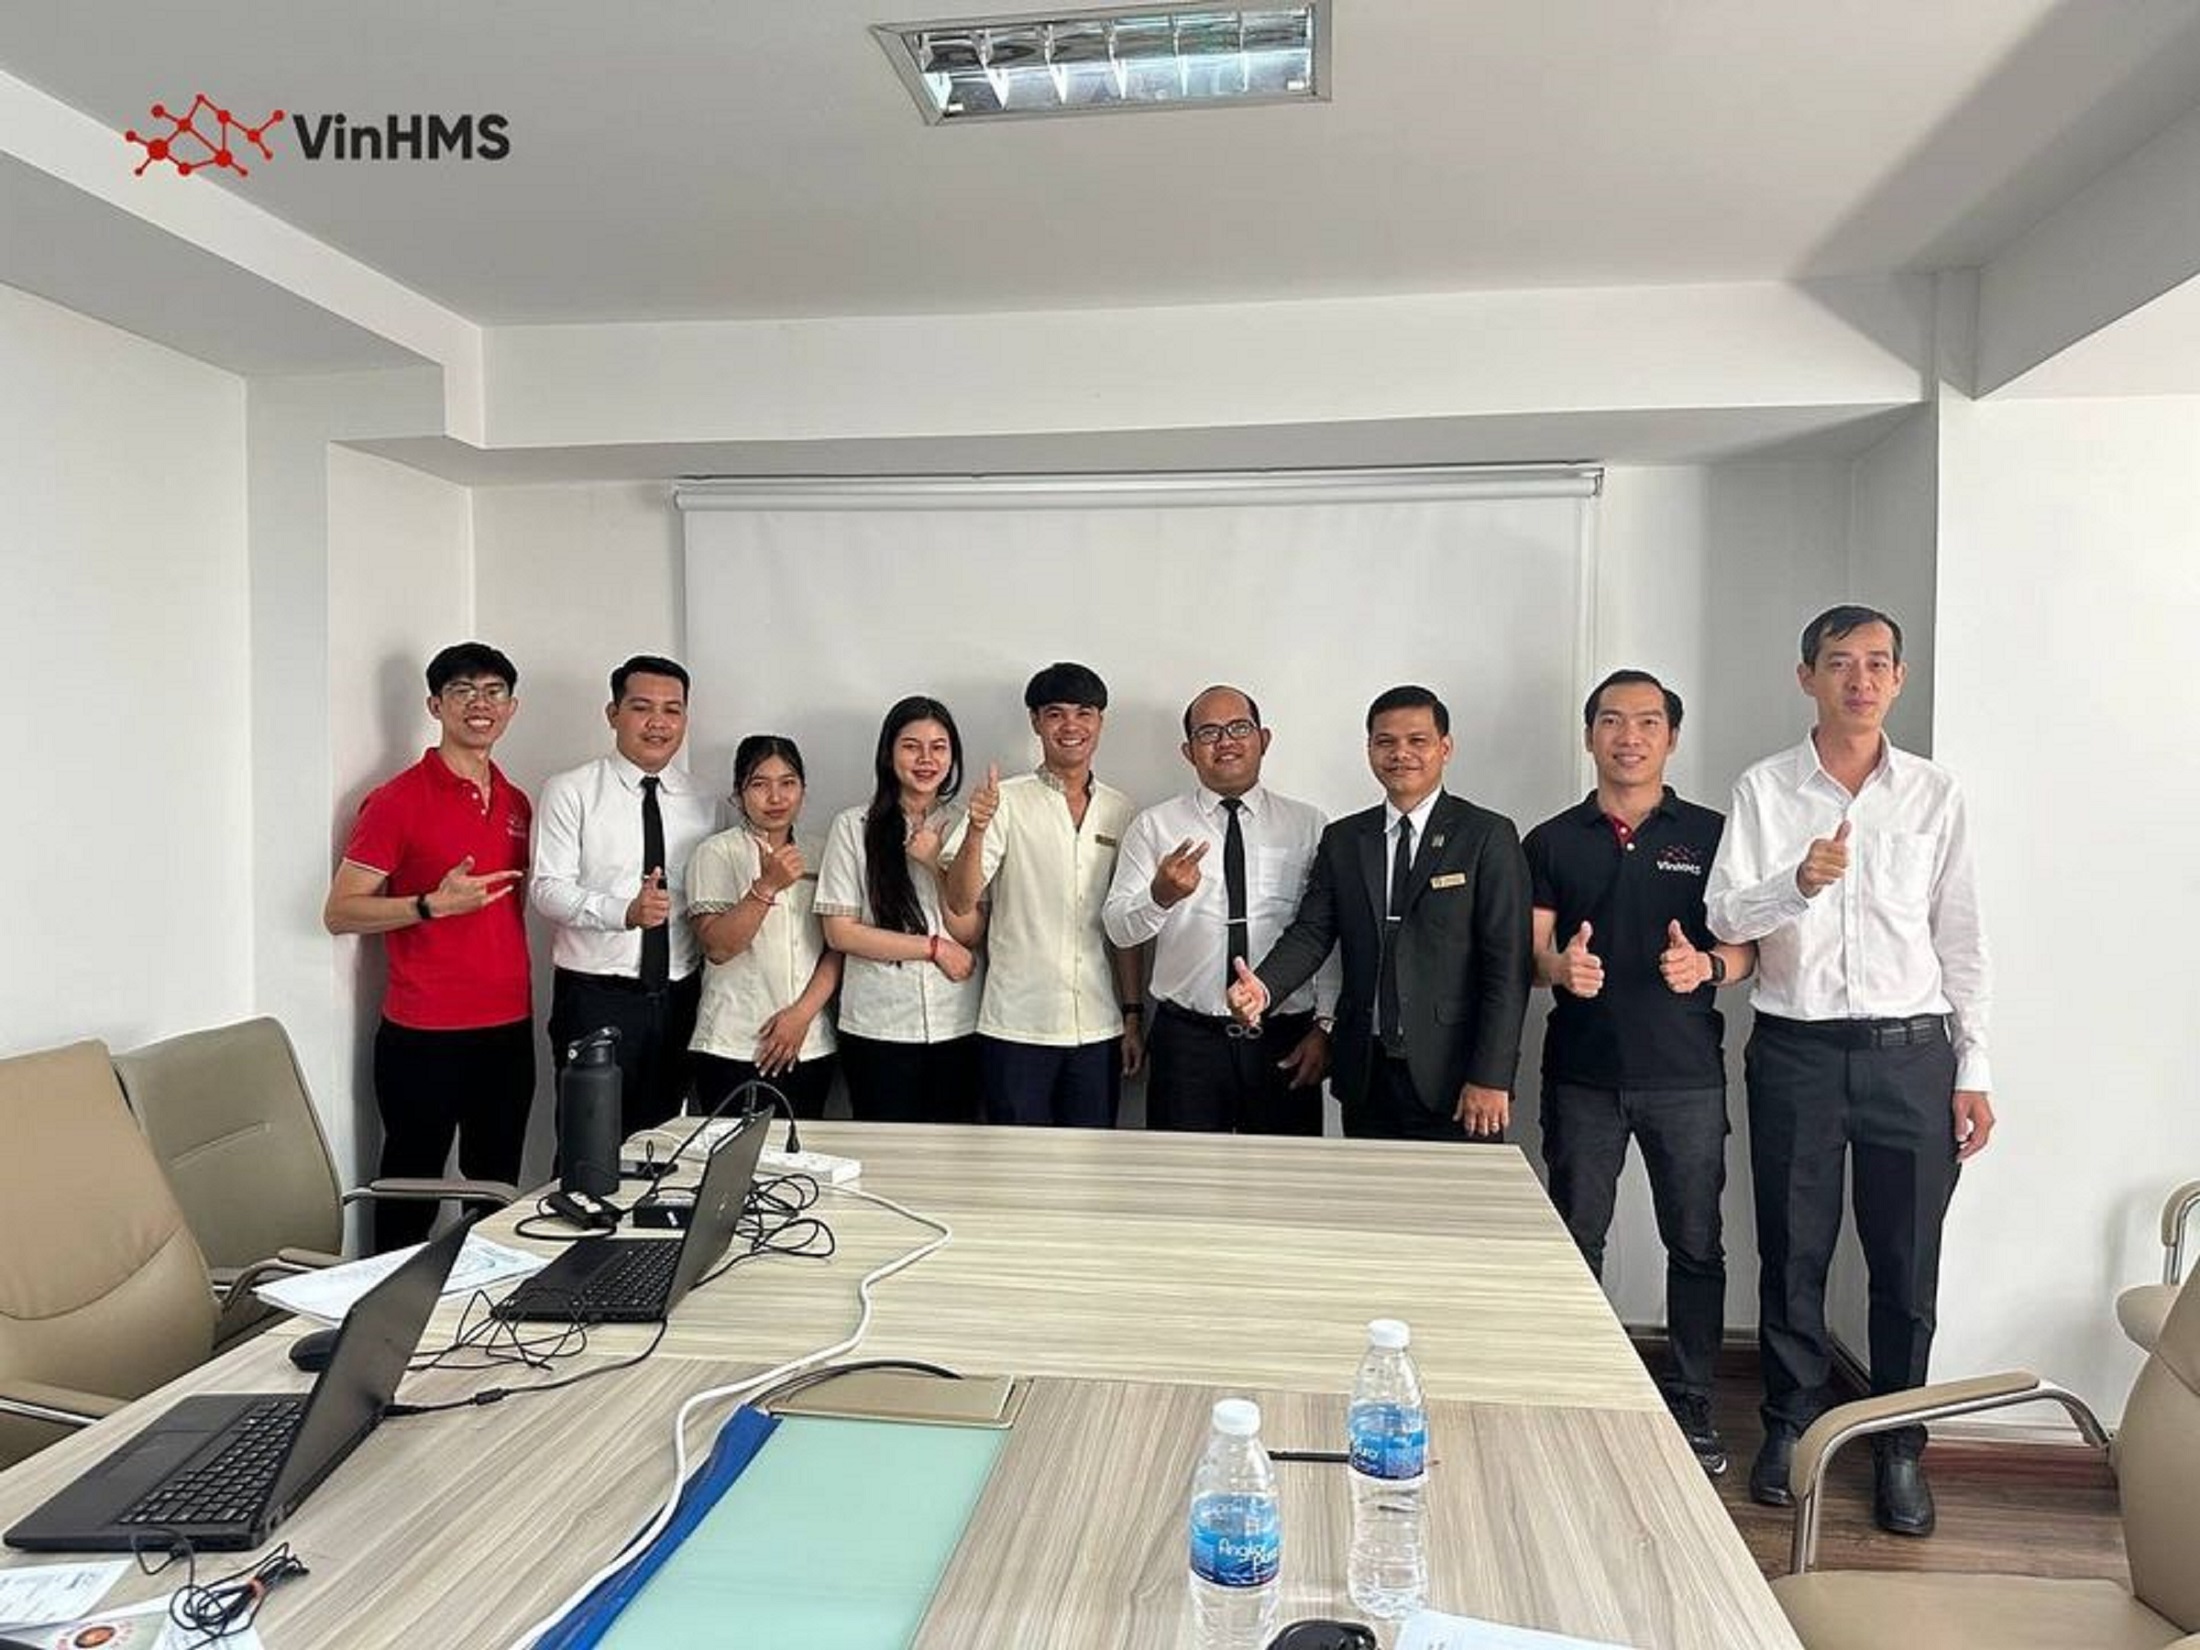 VINHMS AND THE JOURNEY OF BRINGING “MAKE IN VIETNAM” PRODUCTS TO THE WORLD